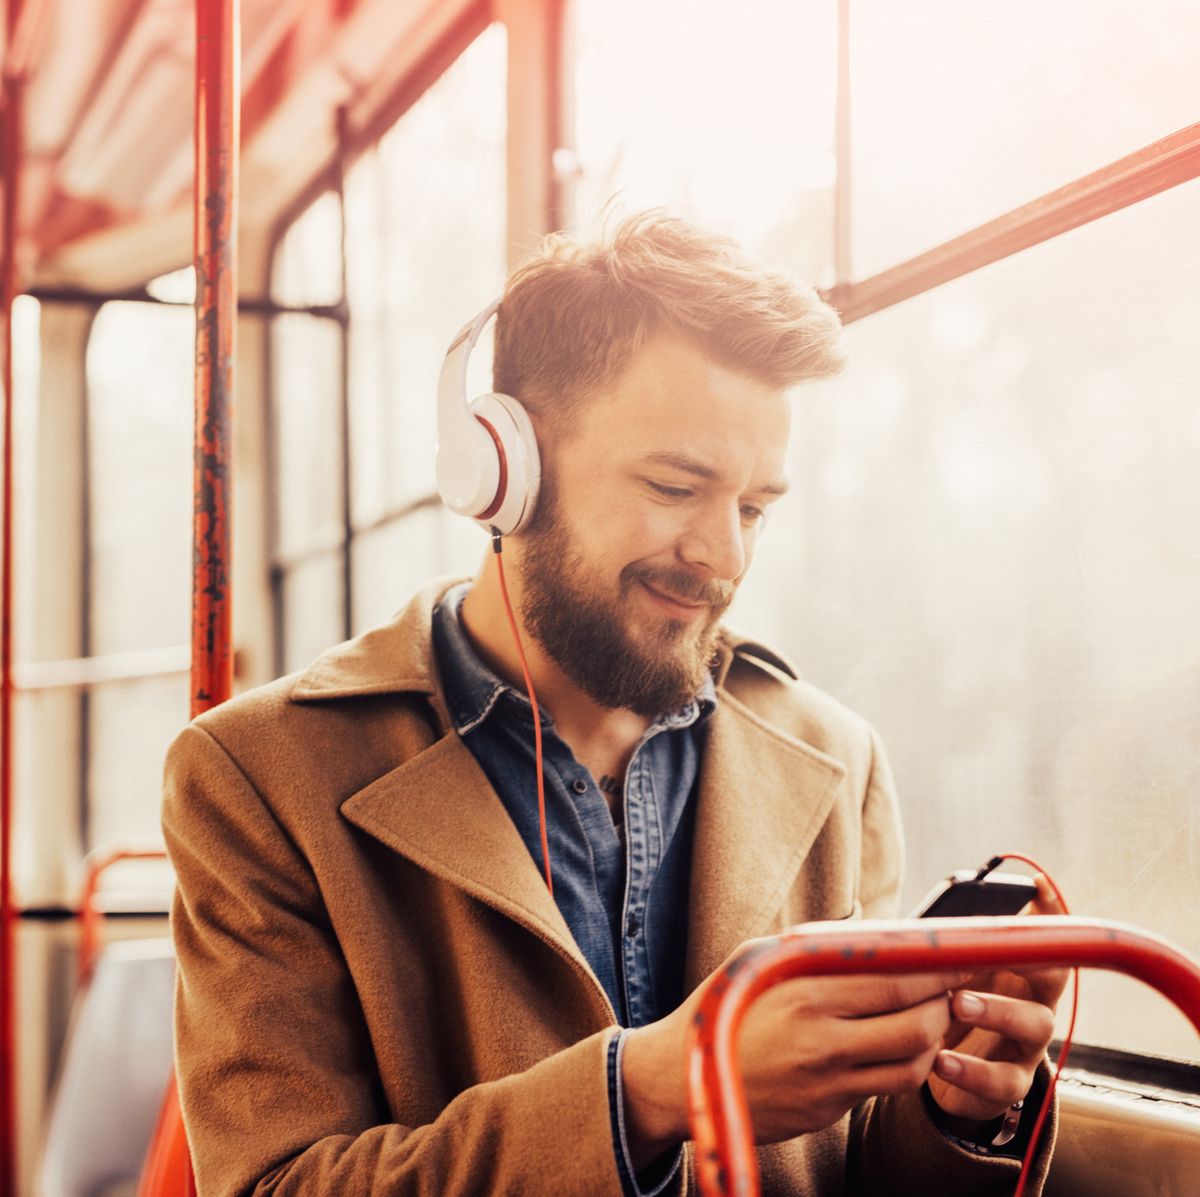 Charming man listening to music with headphones on a public bus